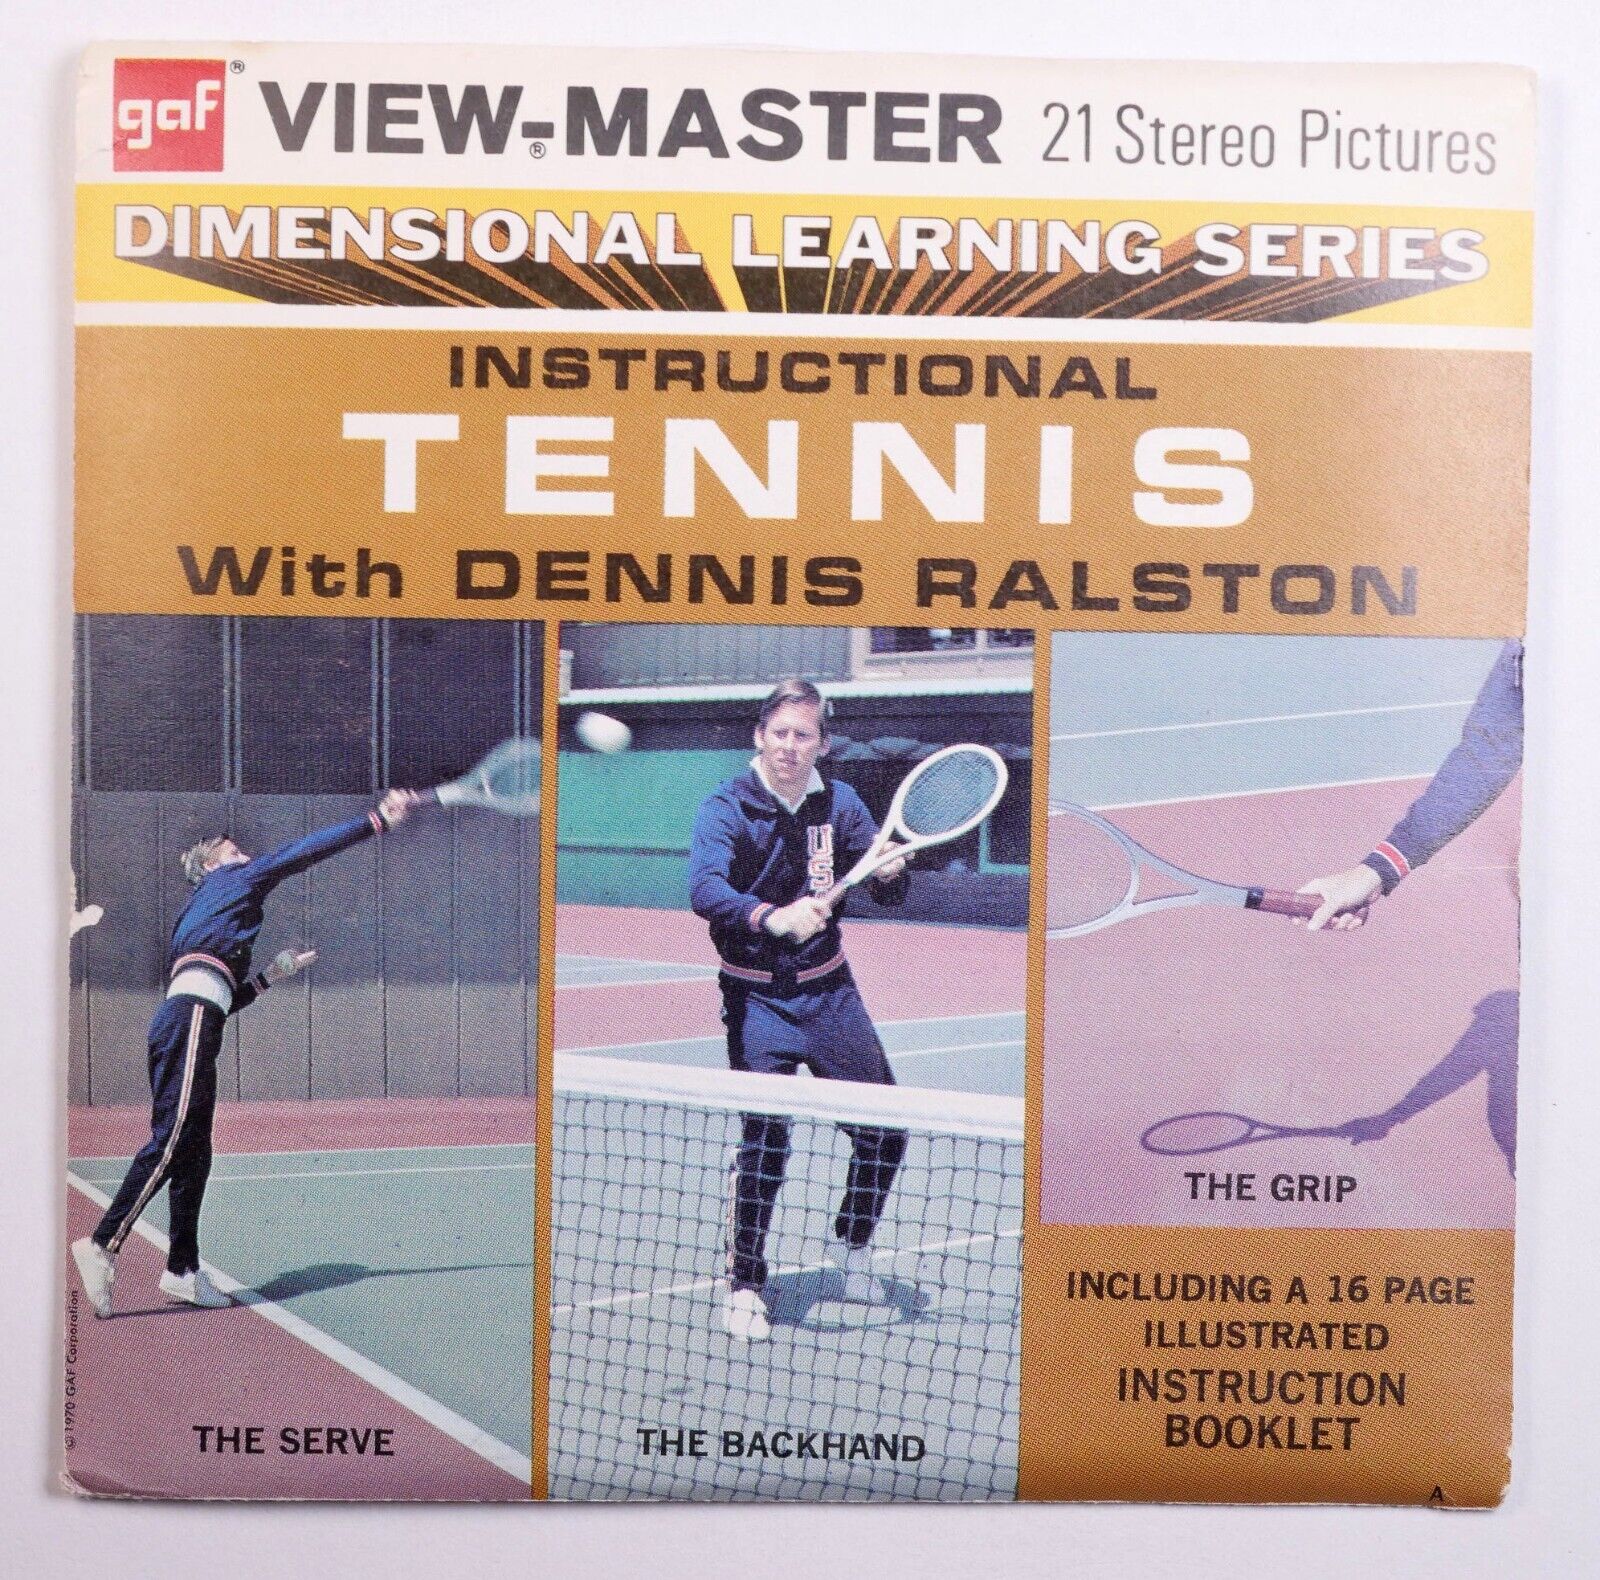 View-Master Instructional Tennis Ralston 3 reel packet/booklet B954 -EGR